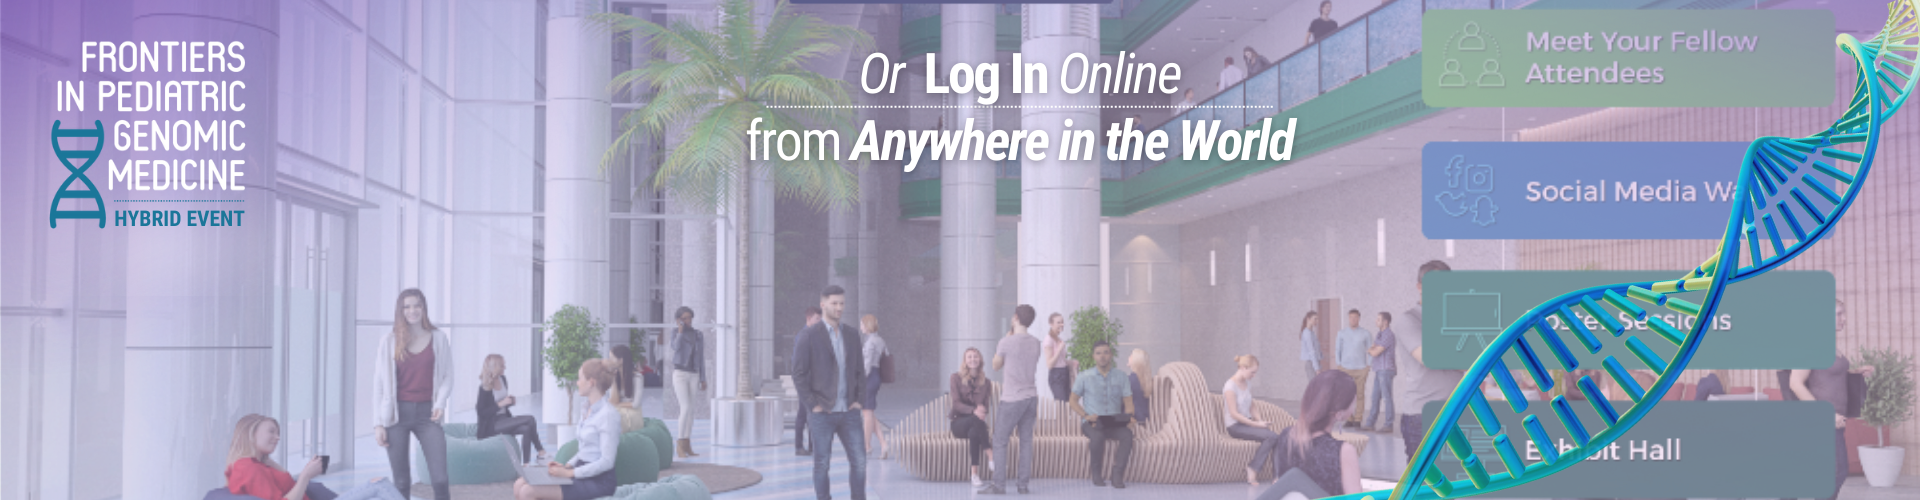 Or log in from anywhere in the world